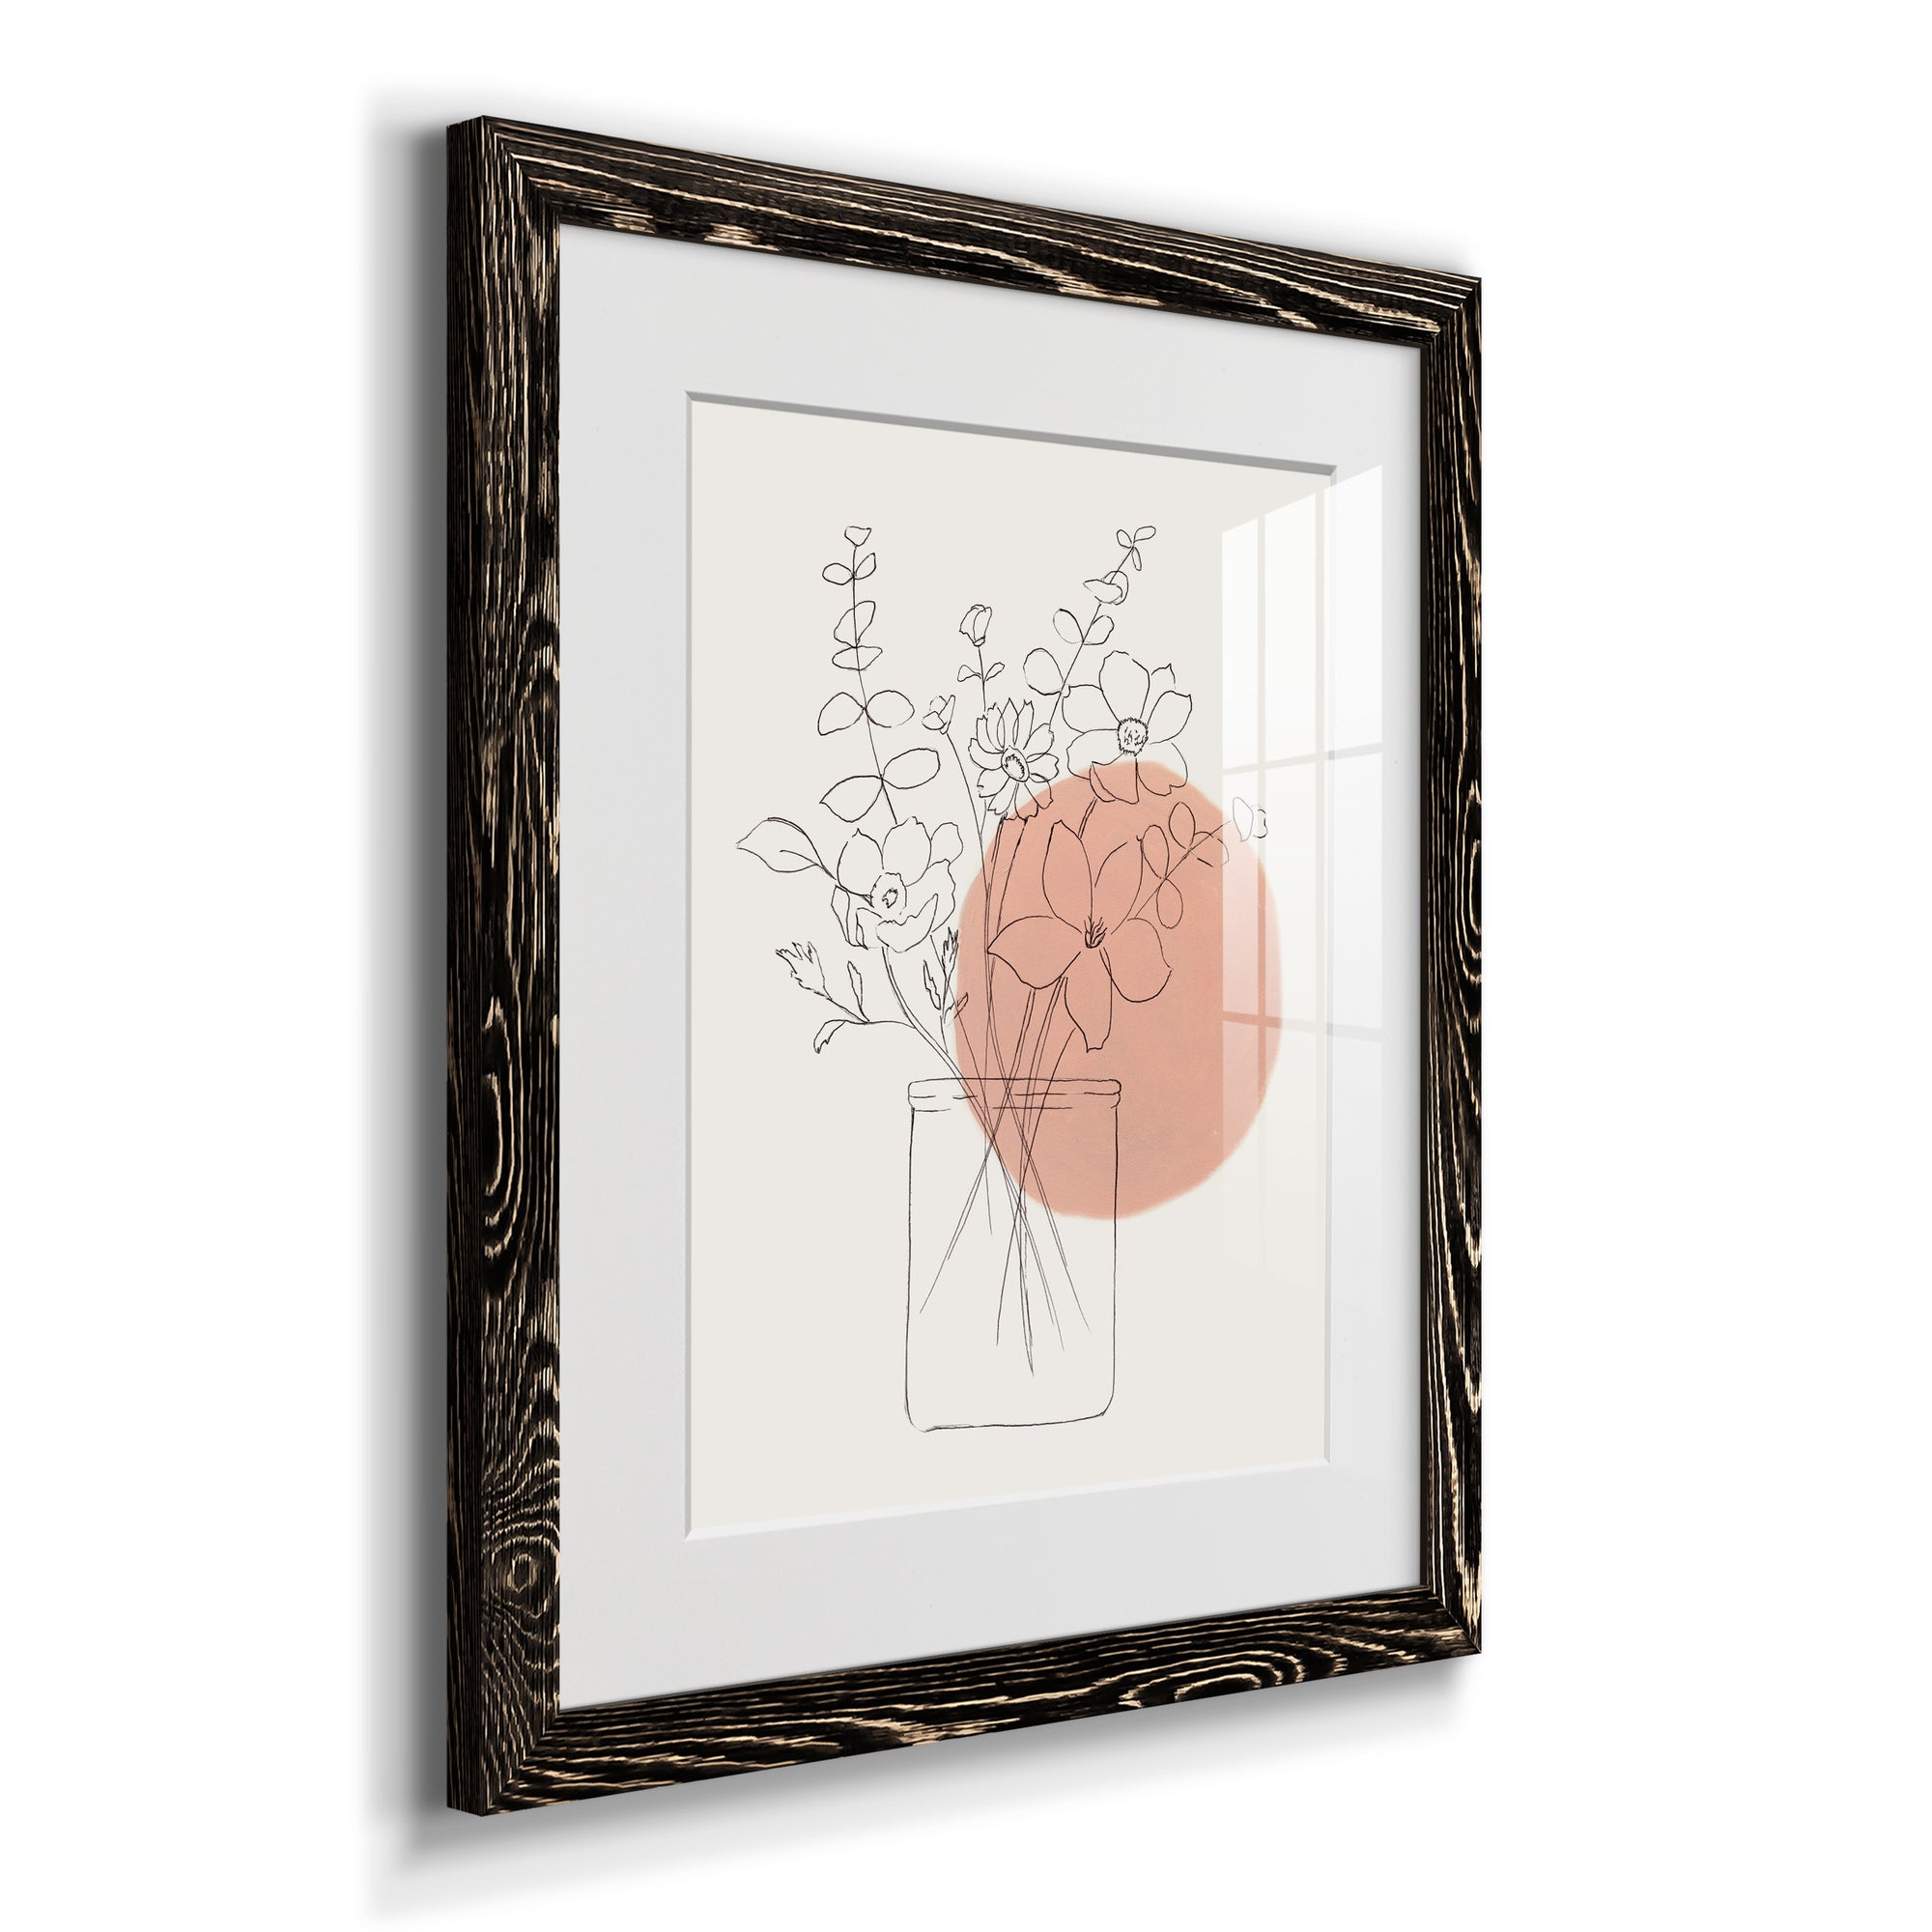 Contemporary Wildflower Bouquet - Premium Framed Print - Distressed Barnwood Frame - Ready to Hang